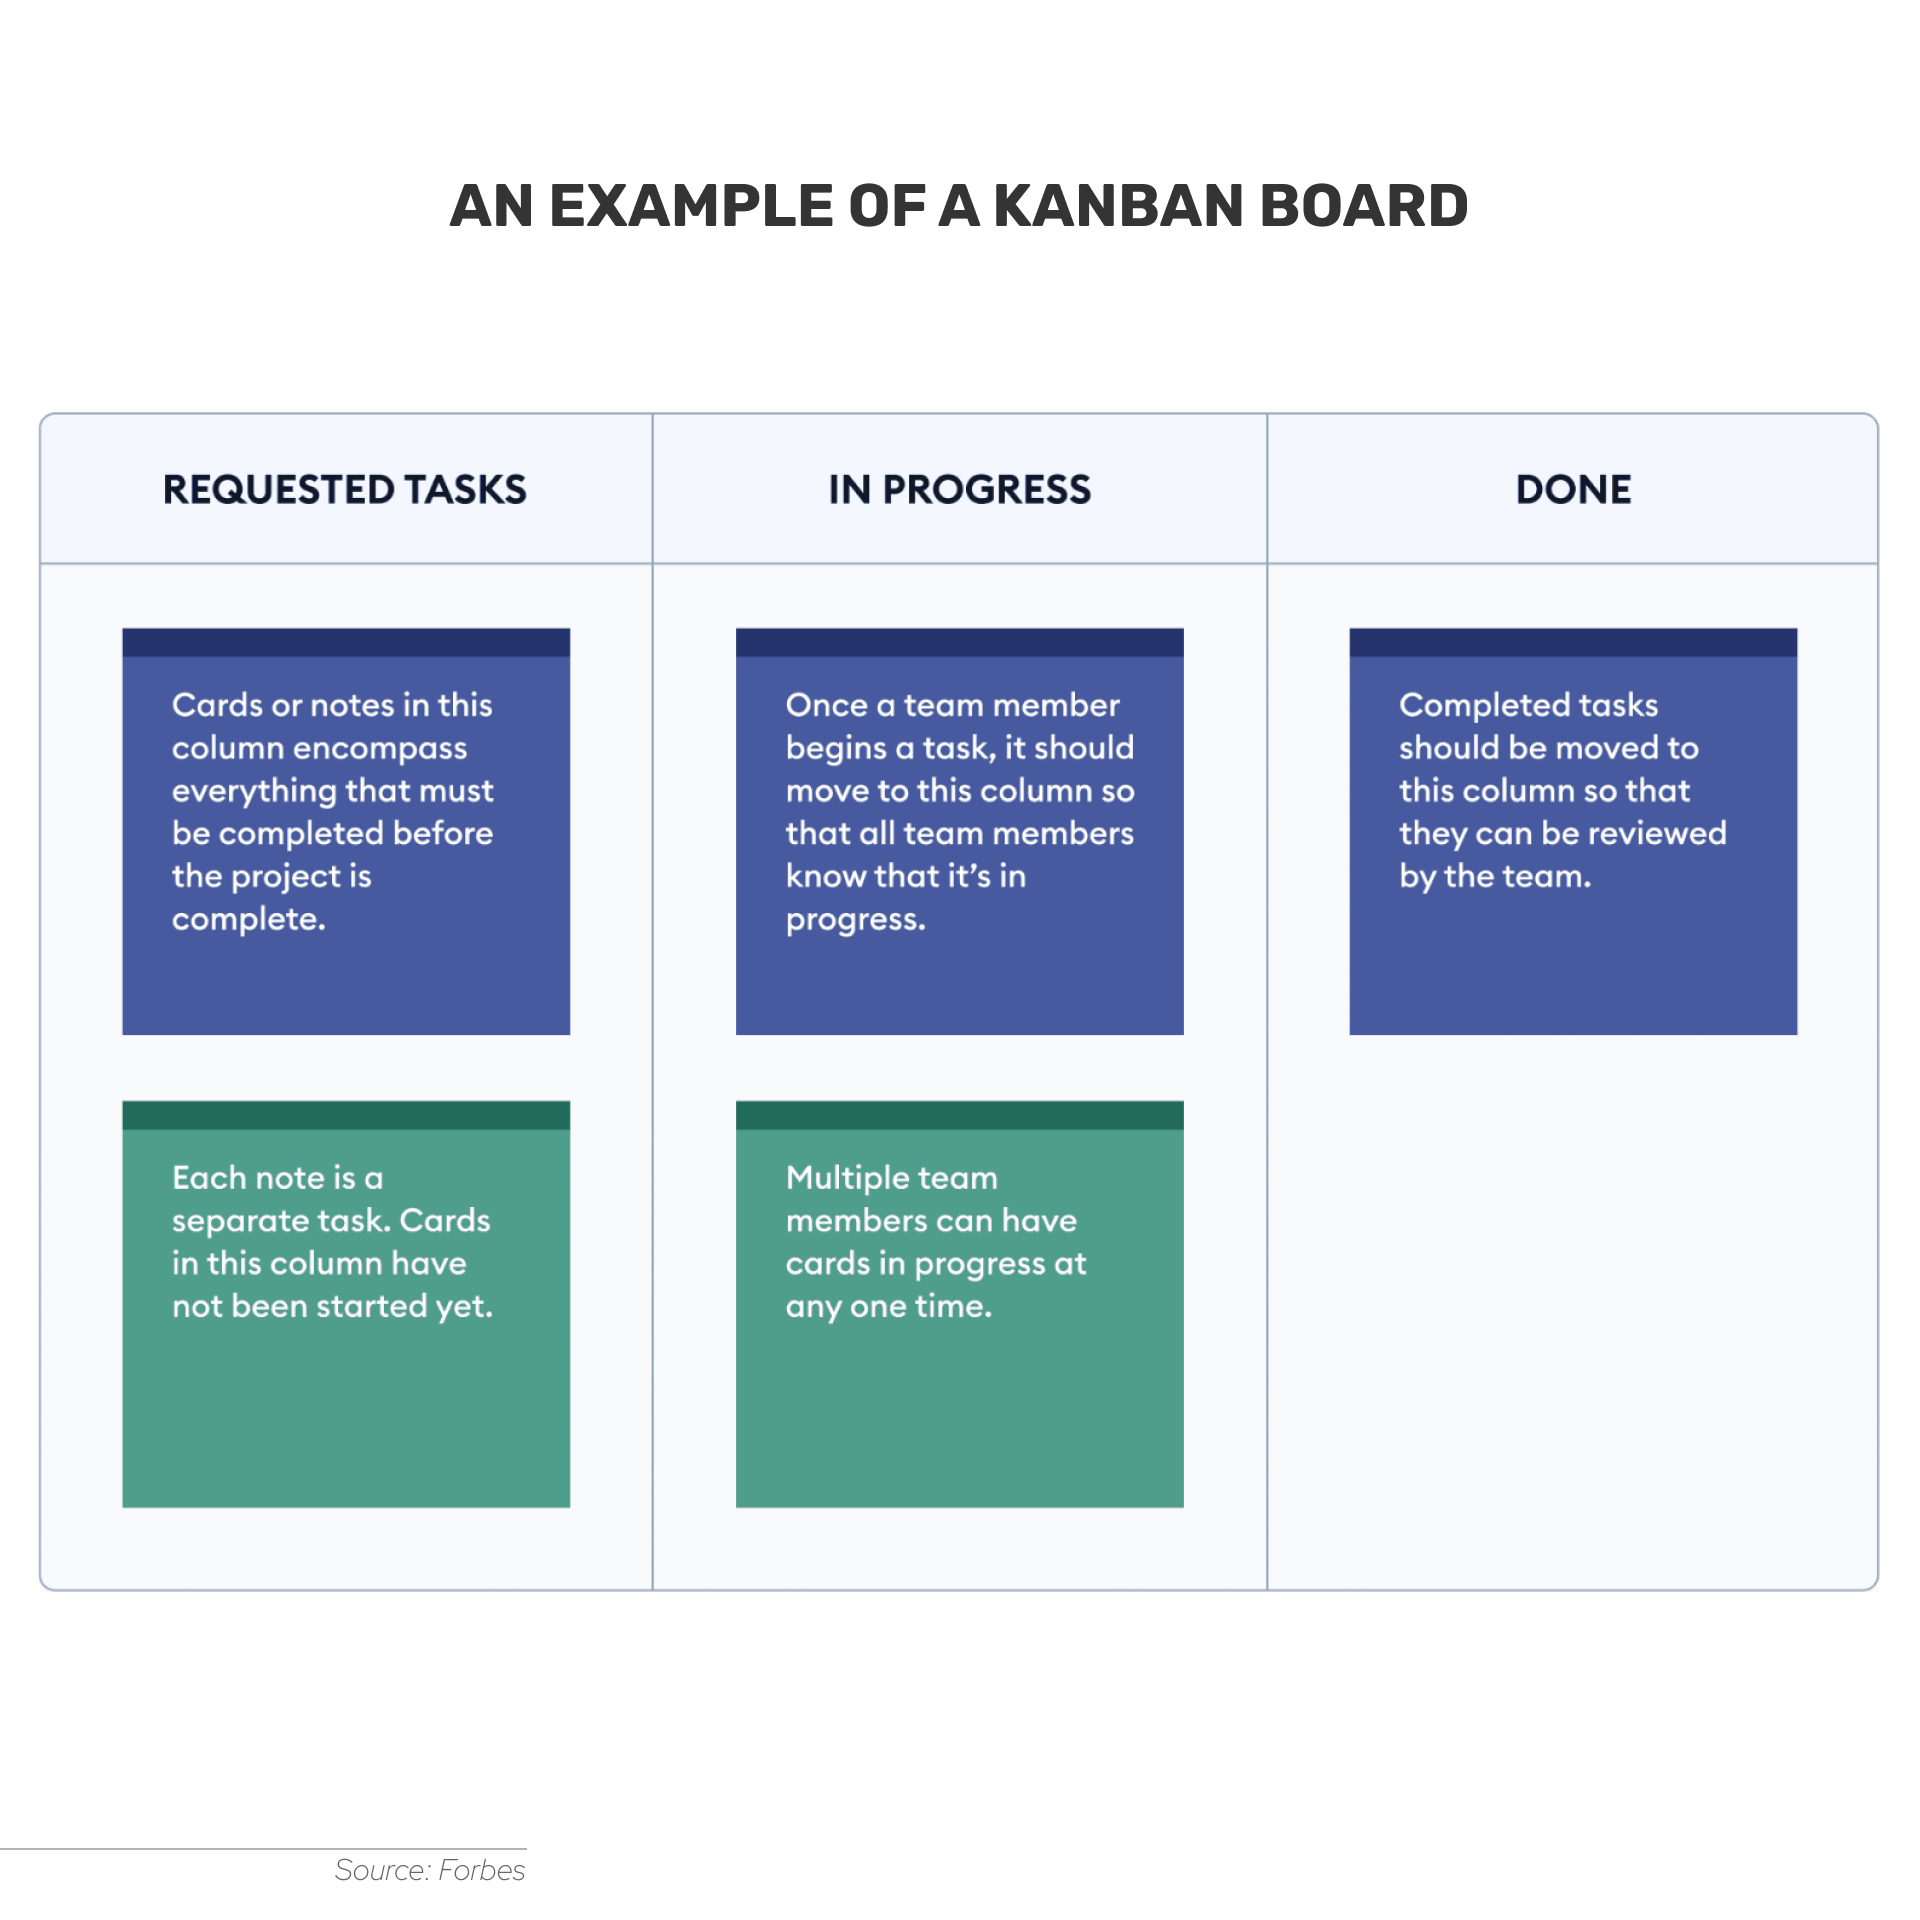 A Kanban board consists of columns showcasing software development workflows and cards representing certain tasks.